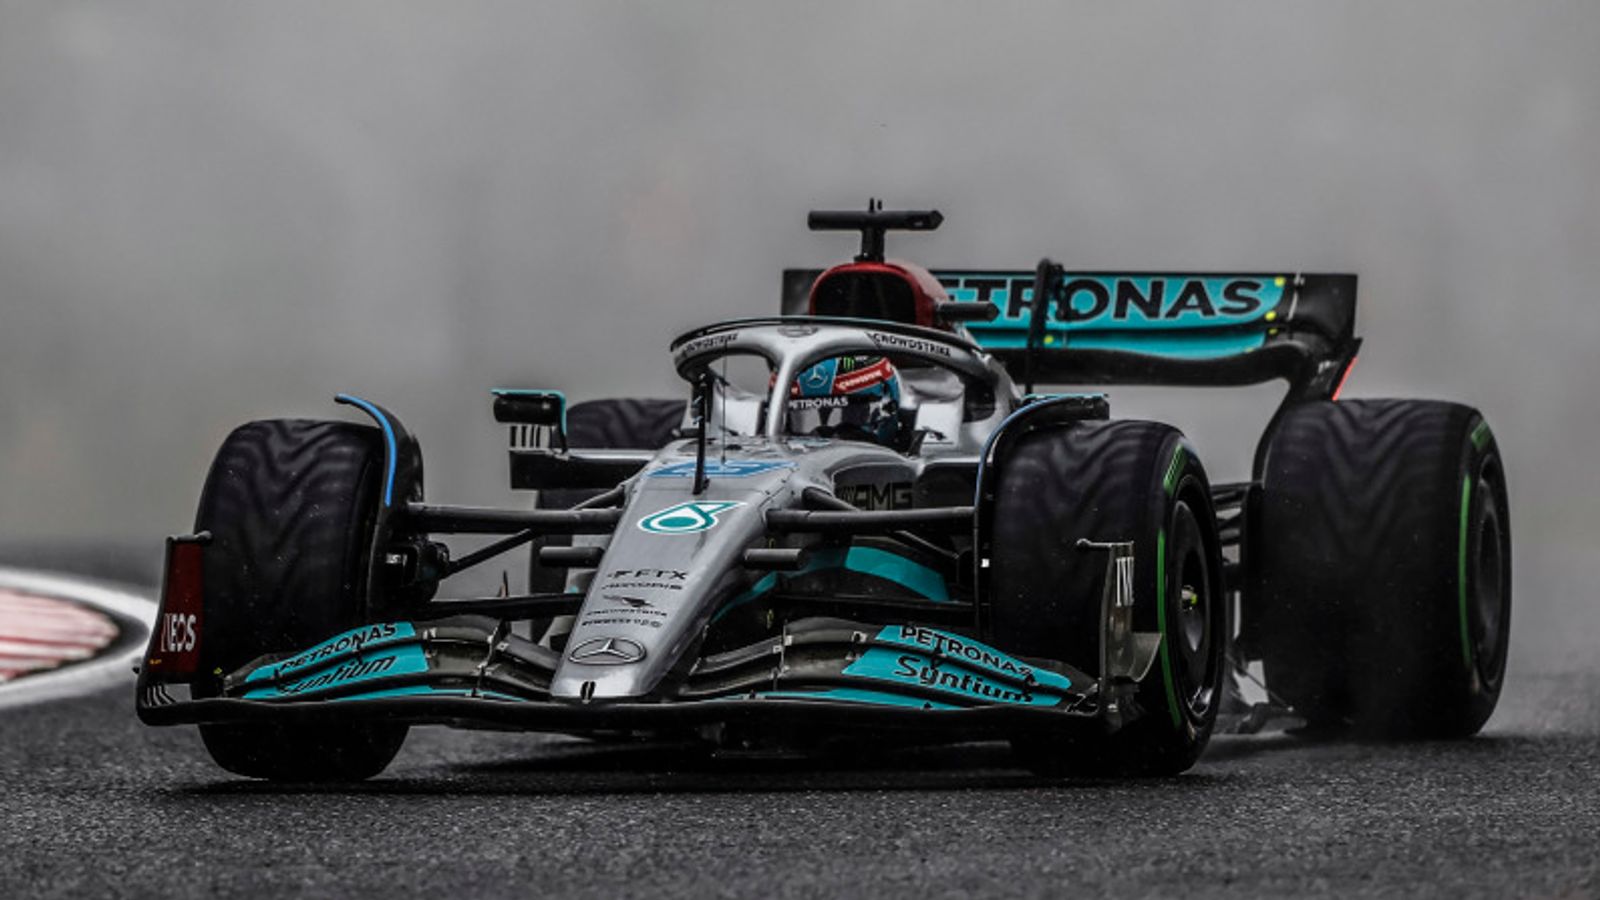 Japanese GP: George Russell leads Lewis Hamilton as Mercedes seal one-two in wet Practice Two